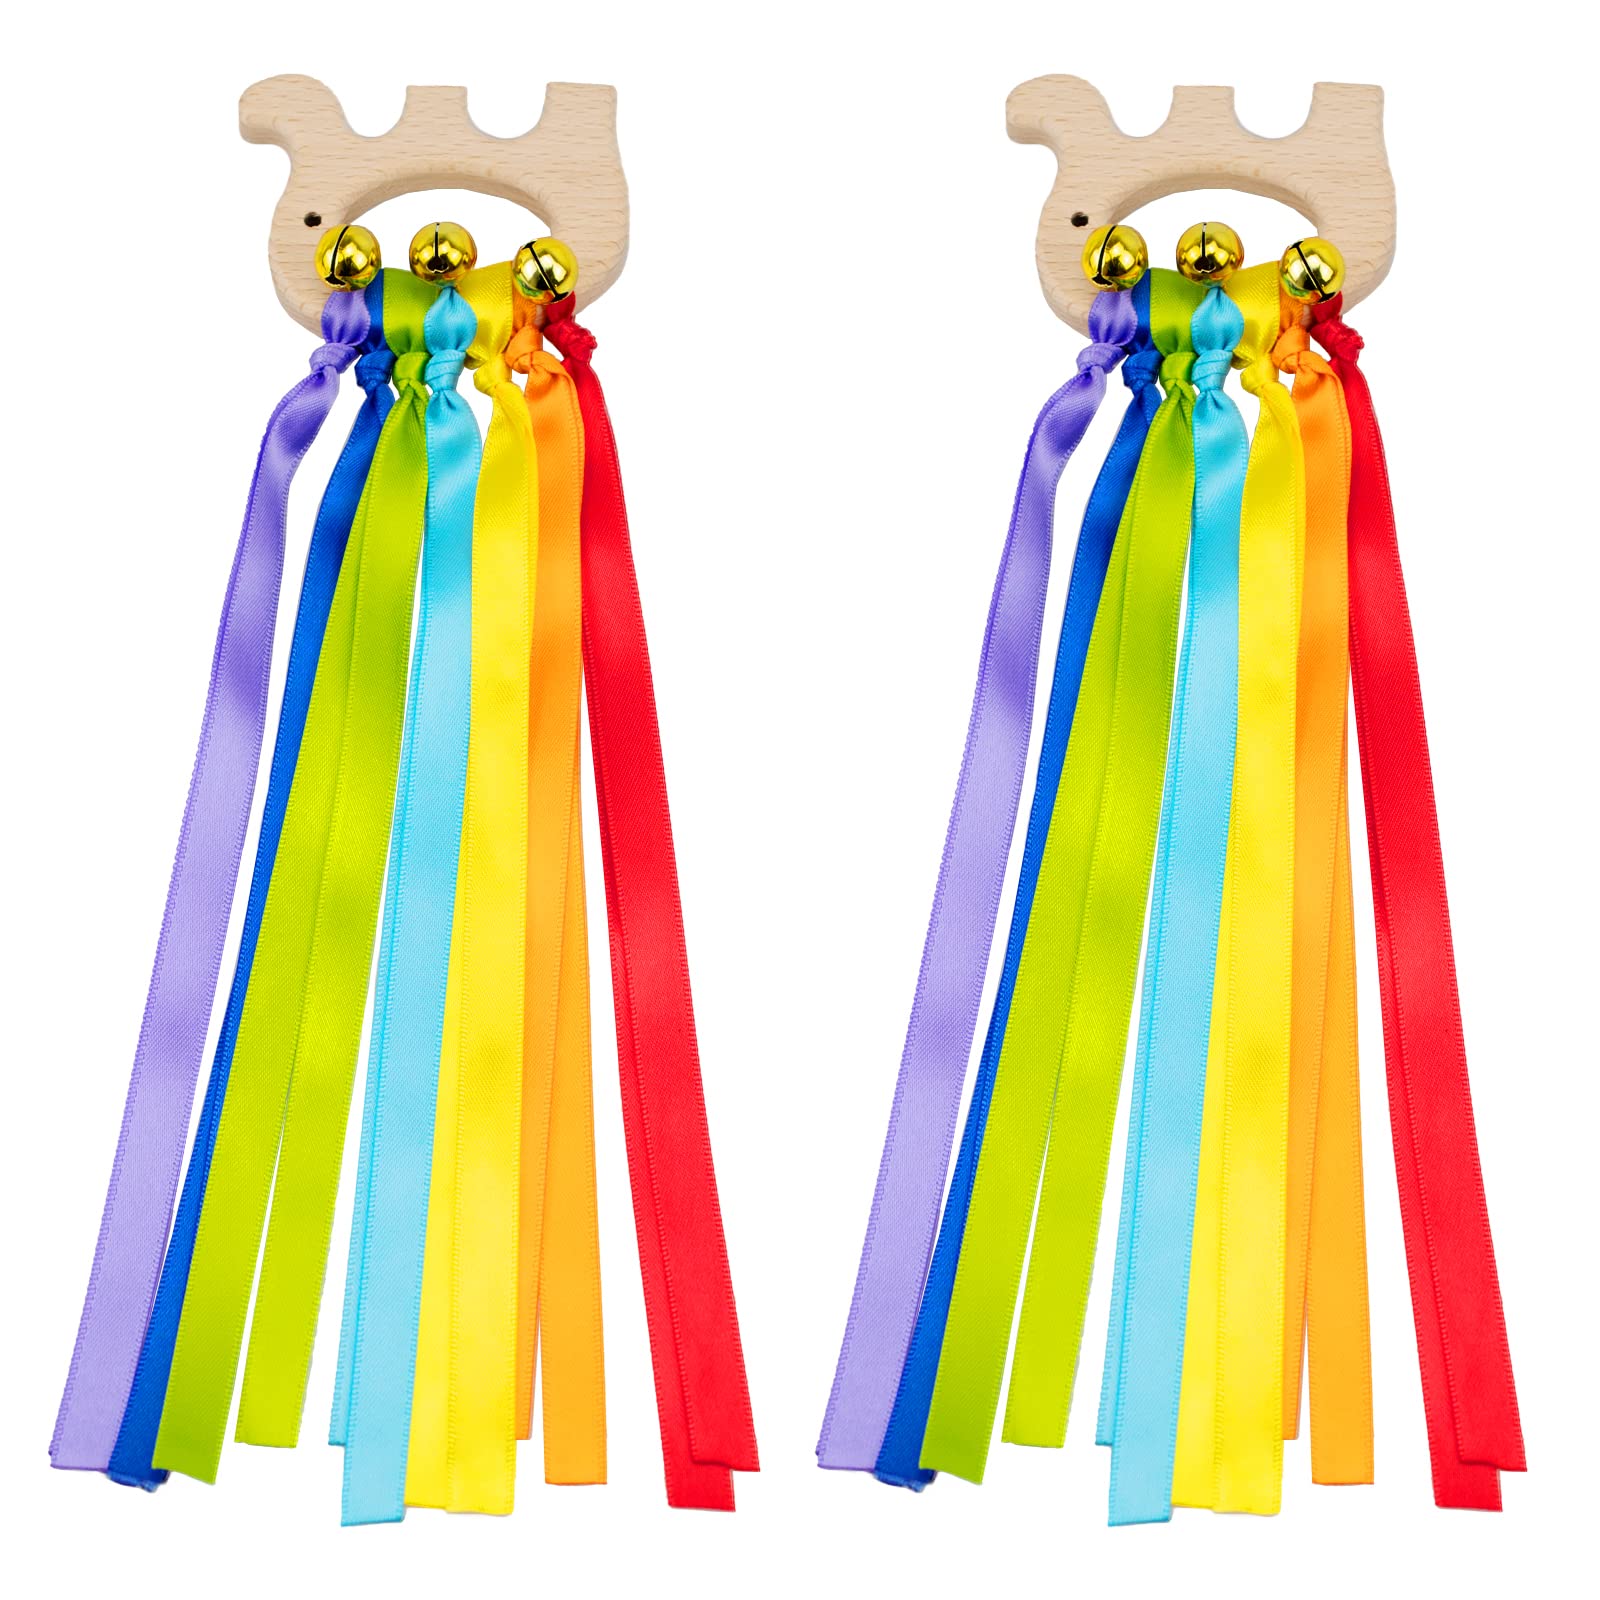 Wendergo 2X Sensory Ribbons for Babies, Wooden Rainbow Rattles, Ribbons Ring Teether Toys, Newborn Infant Toddler Baby Sensory Toys for 6-12 Months Girls Boys